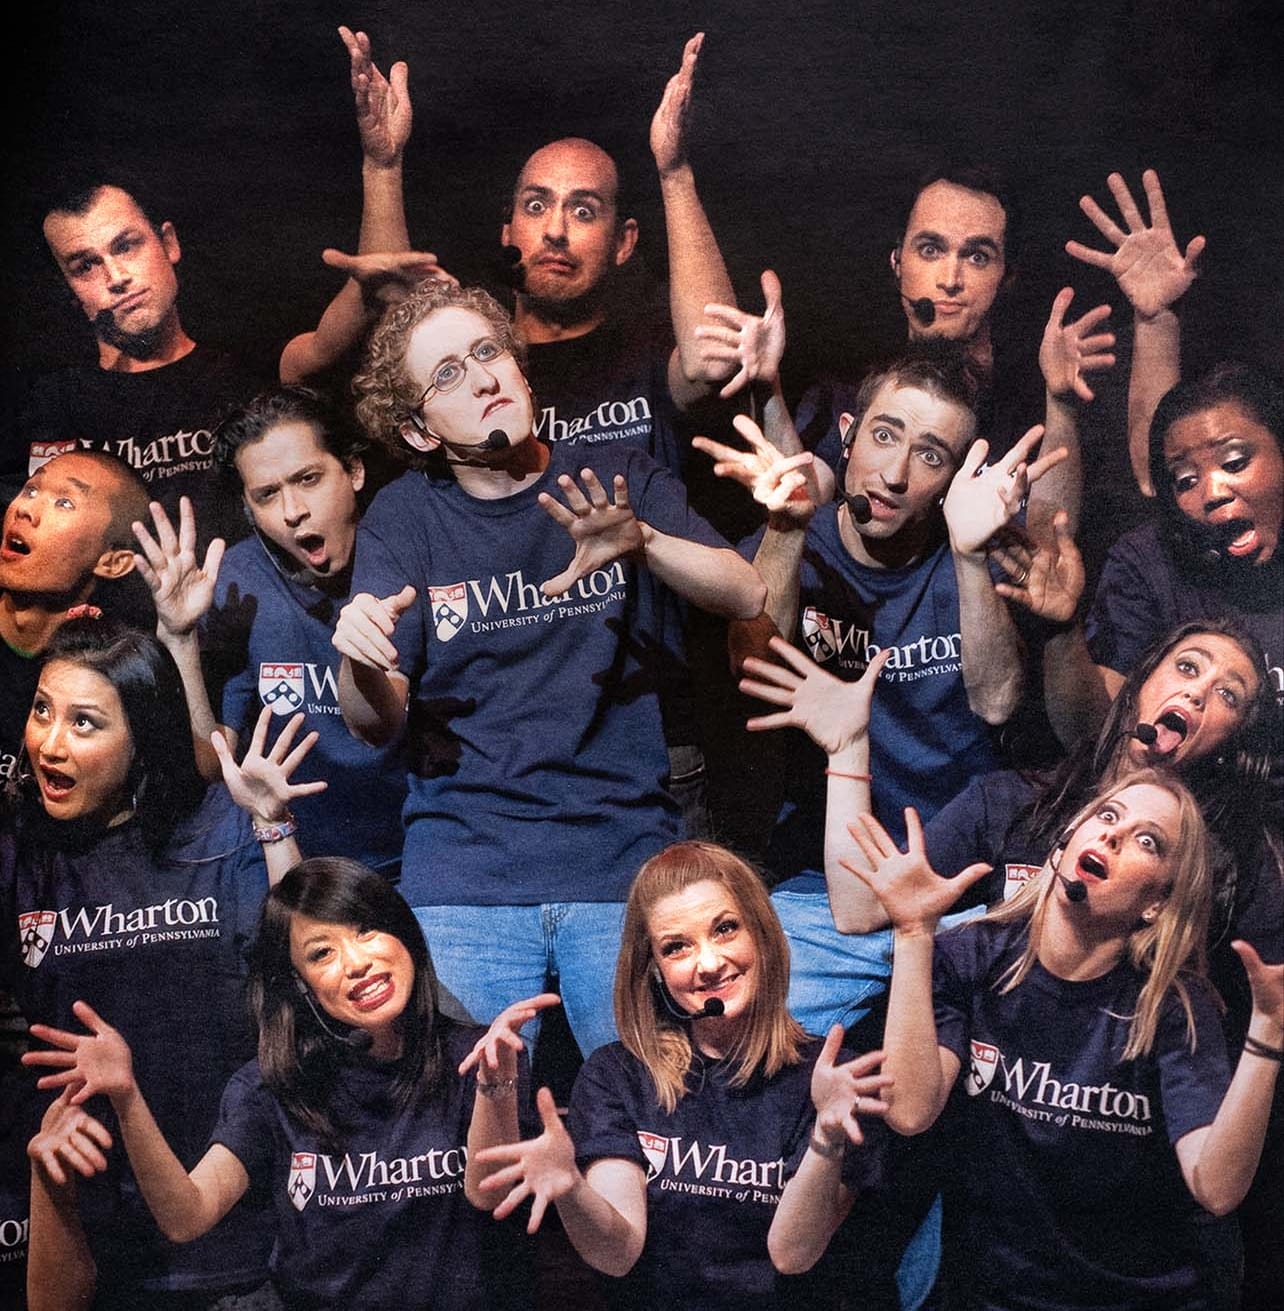 Members of the Follies wearing blue Wharton T-shirts in a past performance.